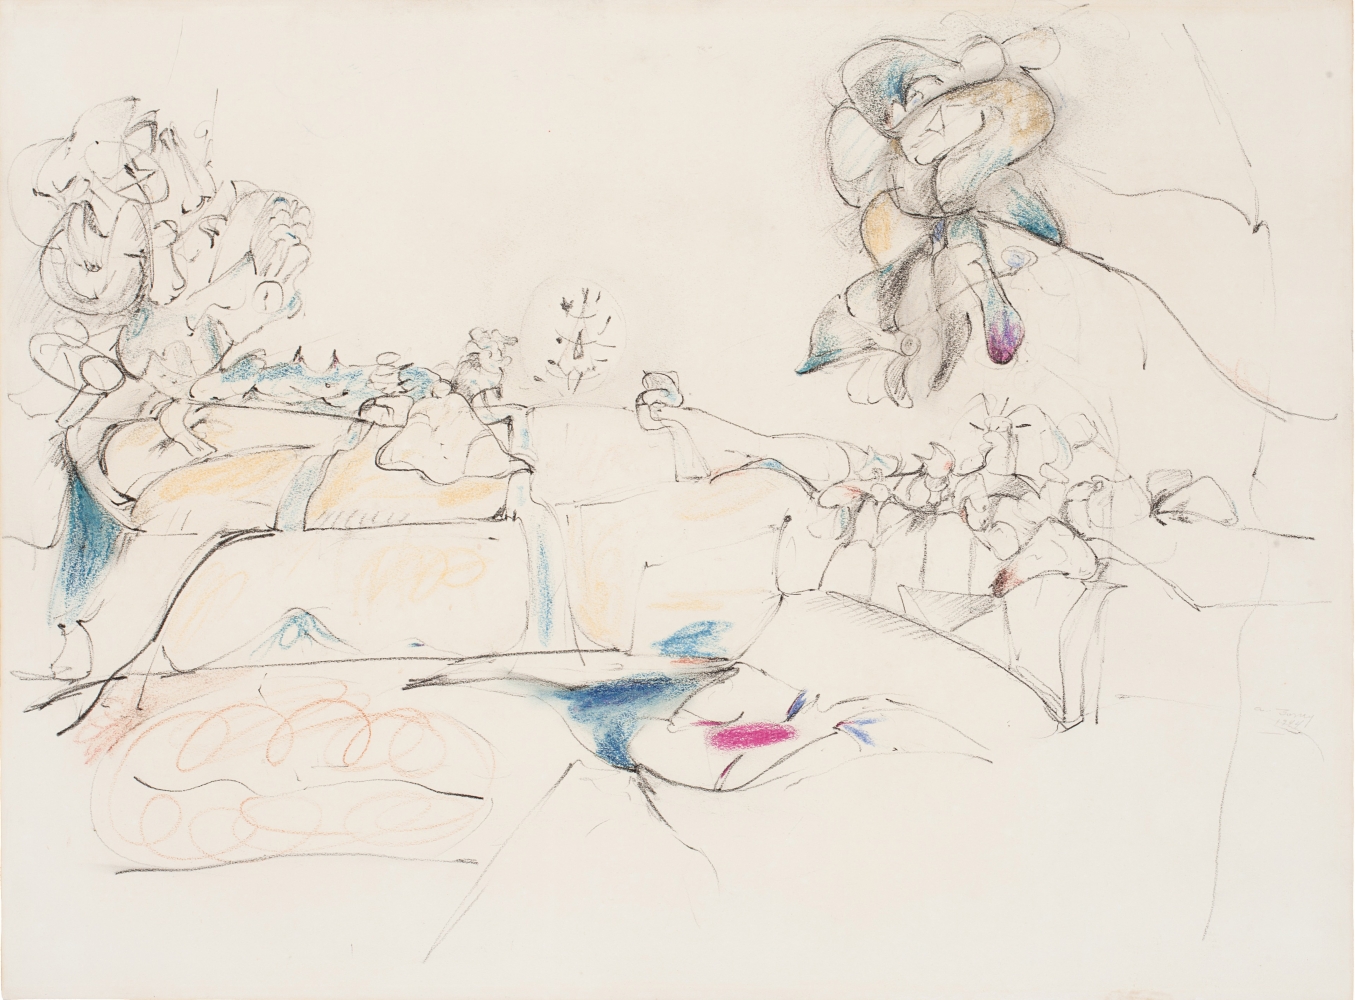 Virginia Landscape, 1944, graphite pencil and crayon on paper, 19 x 25 in. (48.3 x 63.5 cm). Private collection. [AGCR: D1505]